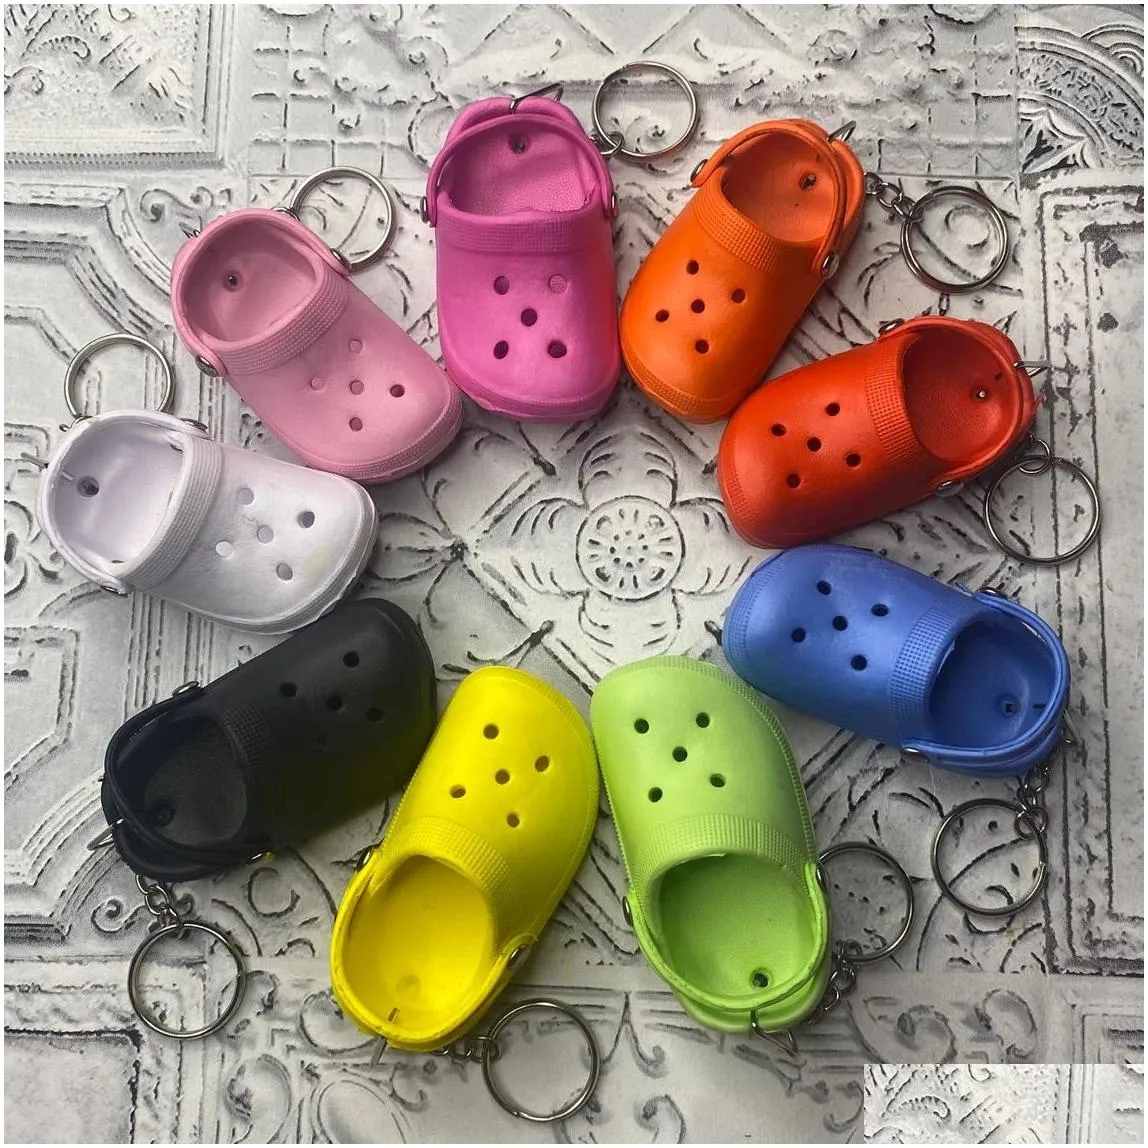 Shoe Parts & Accessories Clog Mini Keychain Trendy Smoll Inspired Keyring Cute Rubber Shoe Keychains Drop Delivery Shoes Accessories Dhwrv